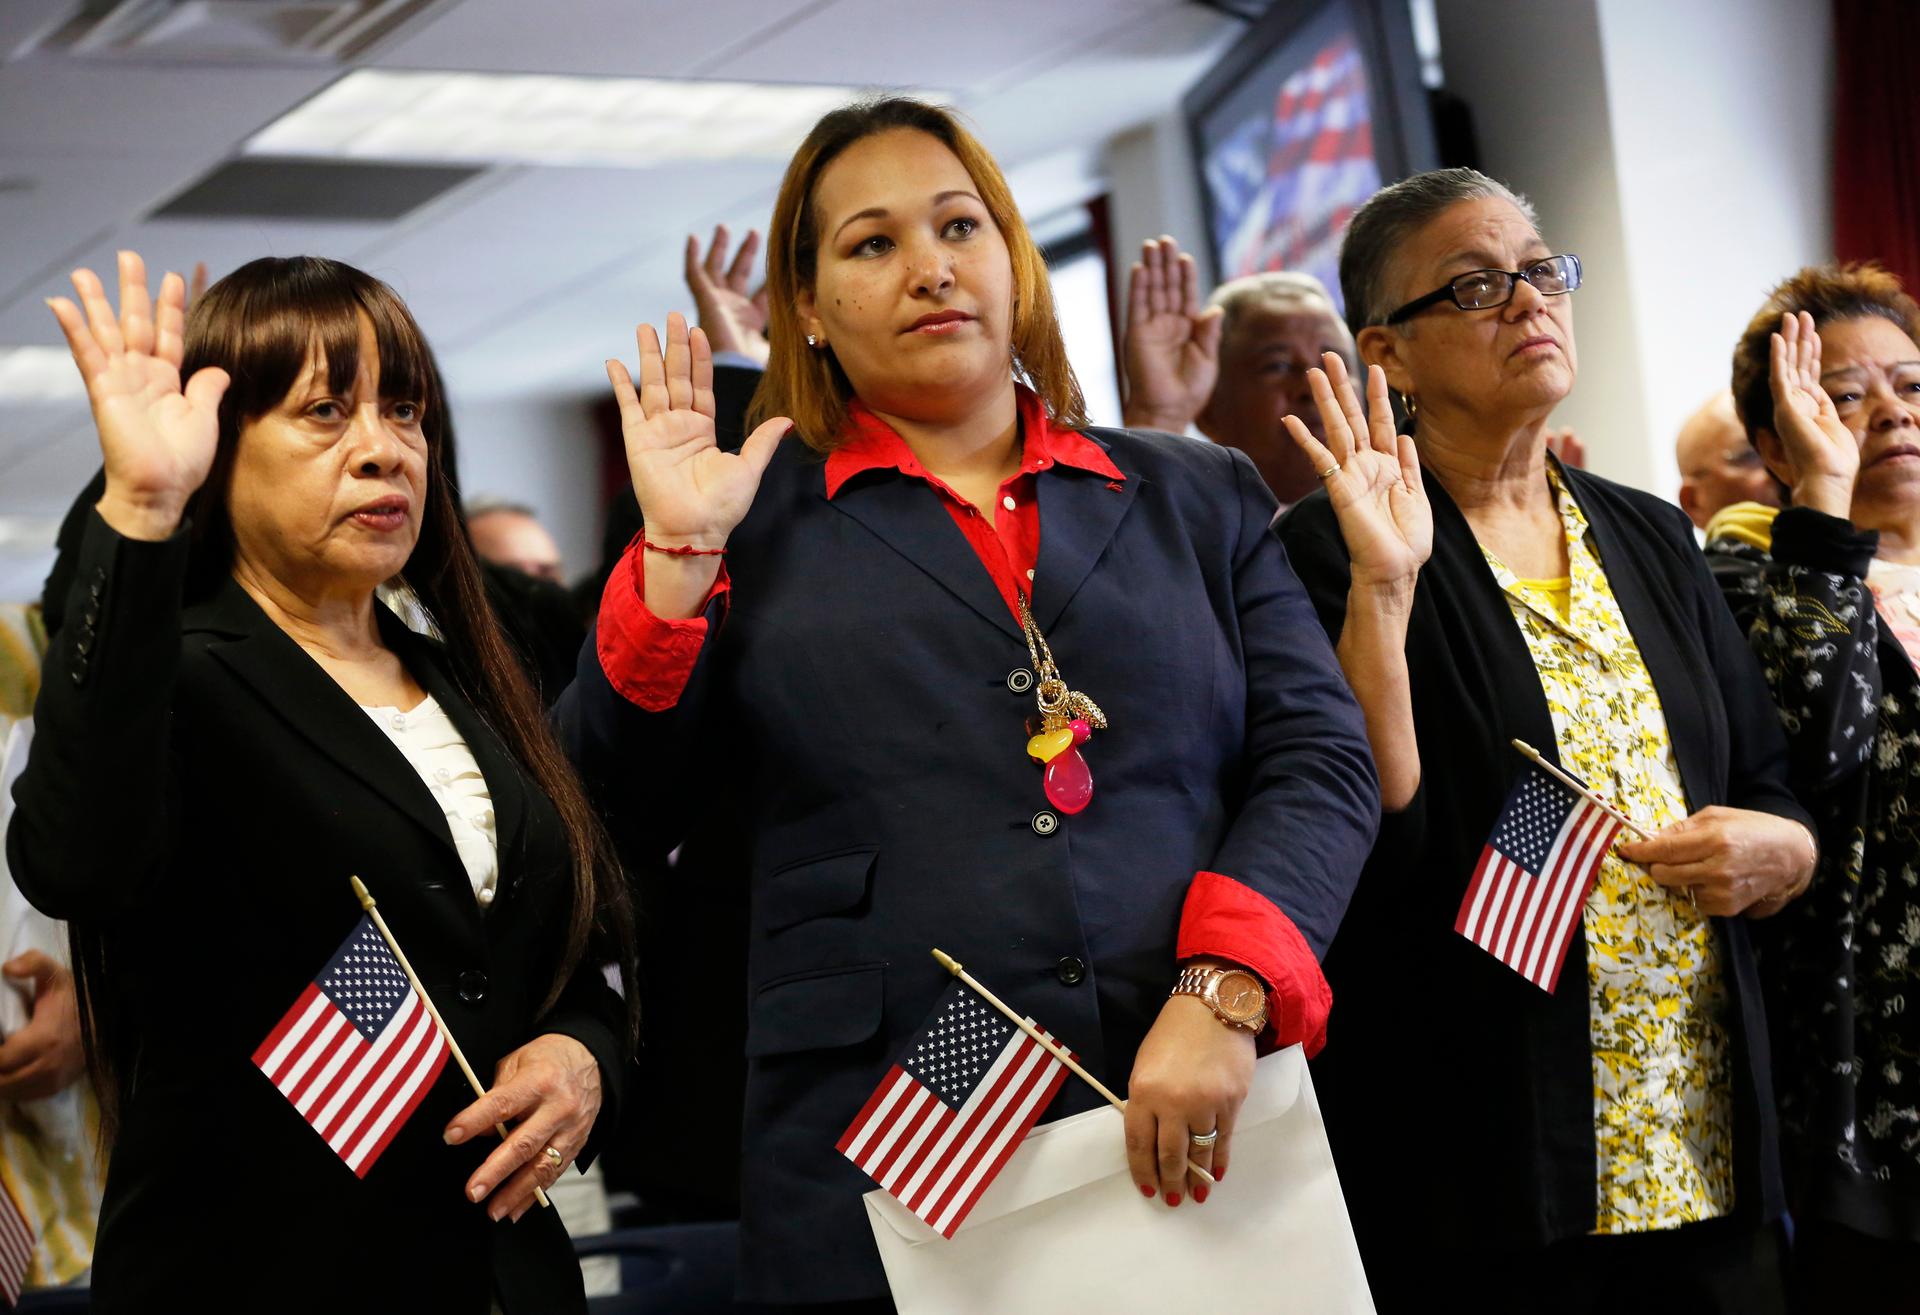 Immigrants take the oath of citizenship during a naturalization ceremony to become new citizens of the U.S. in New York.